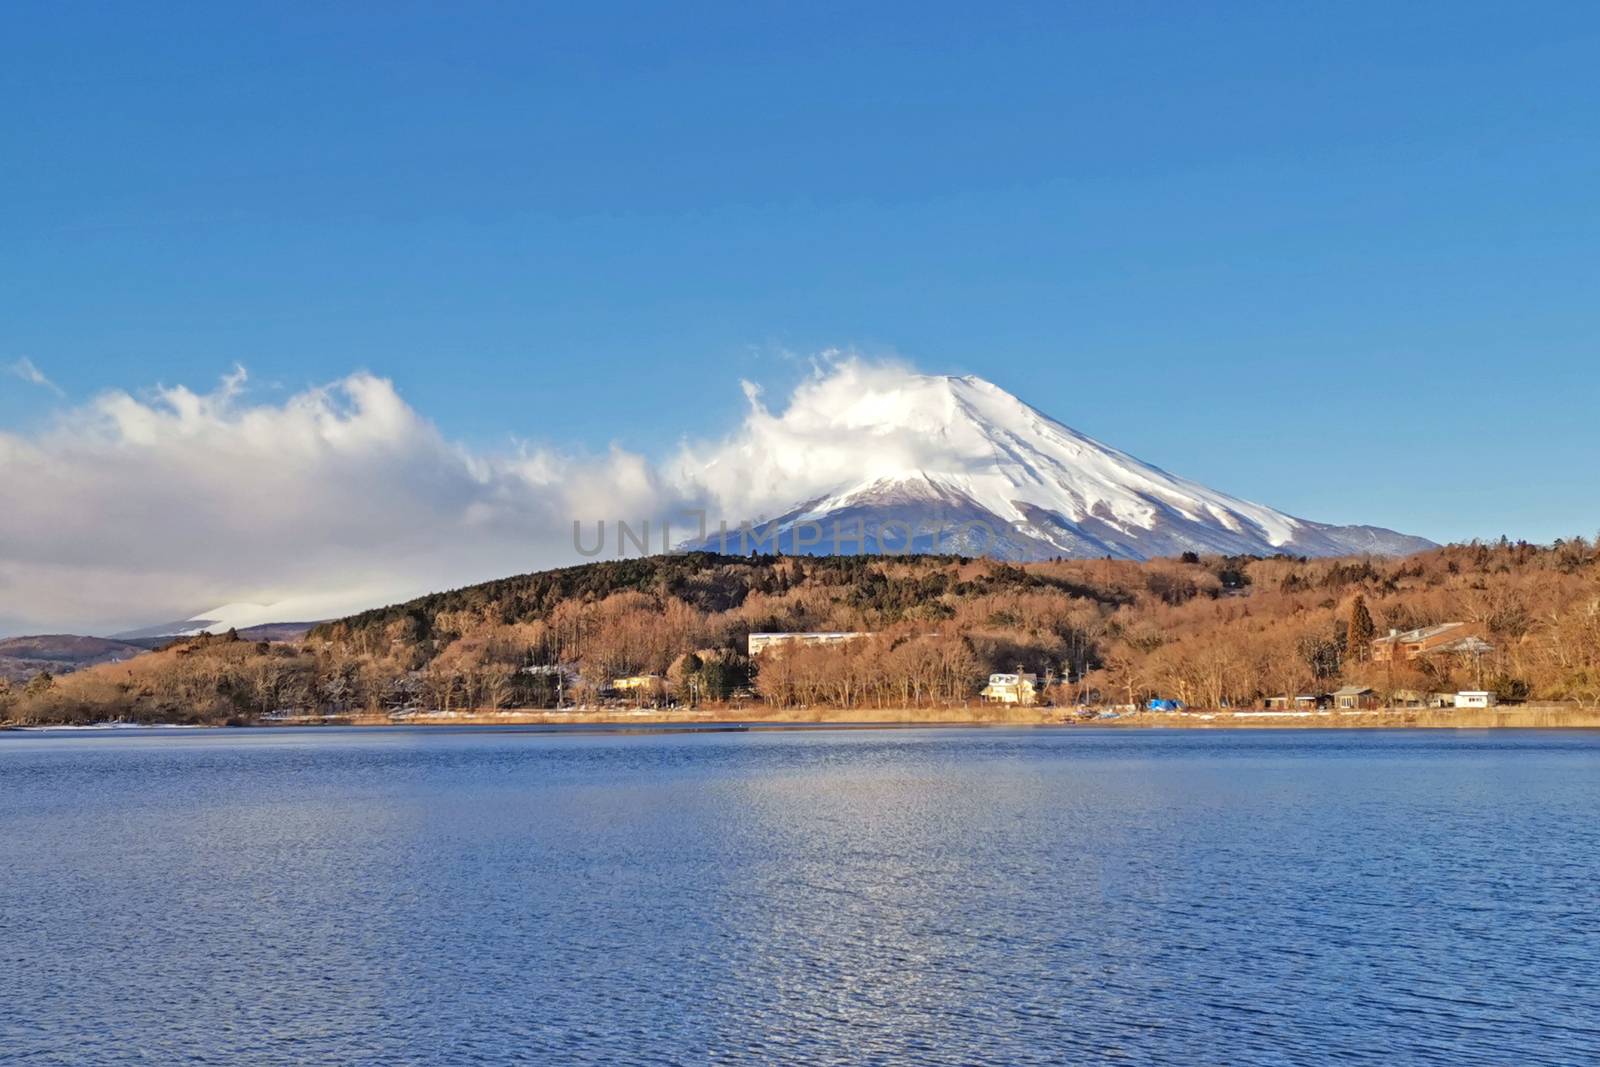 Lake, sky and Fuji mountain with snow in Japan countryside by cougarsan